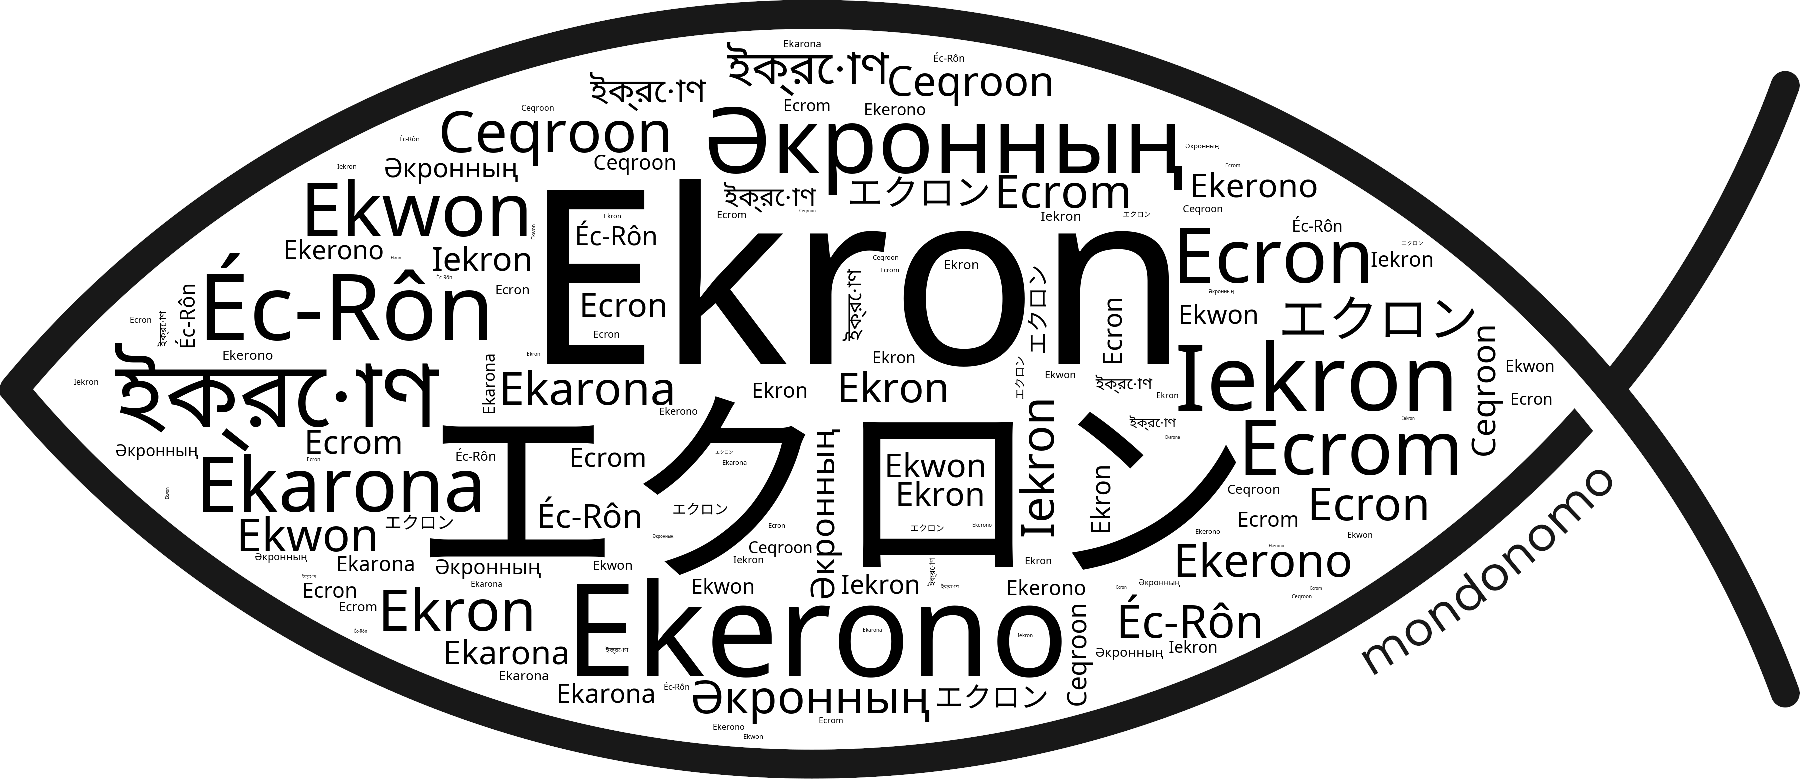 Name Ekron in the world's Bibles